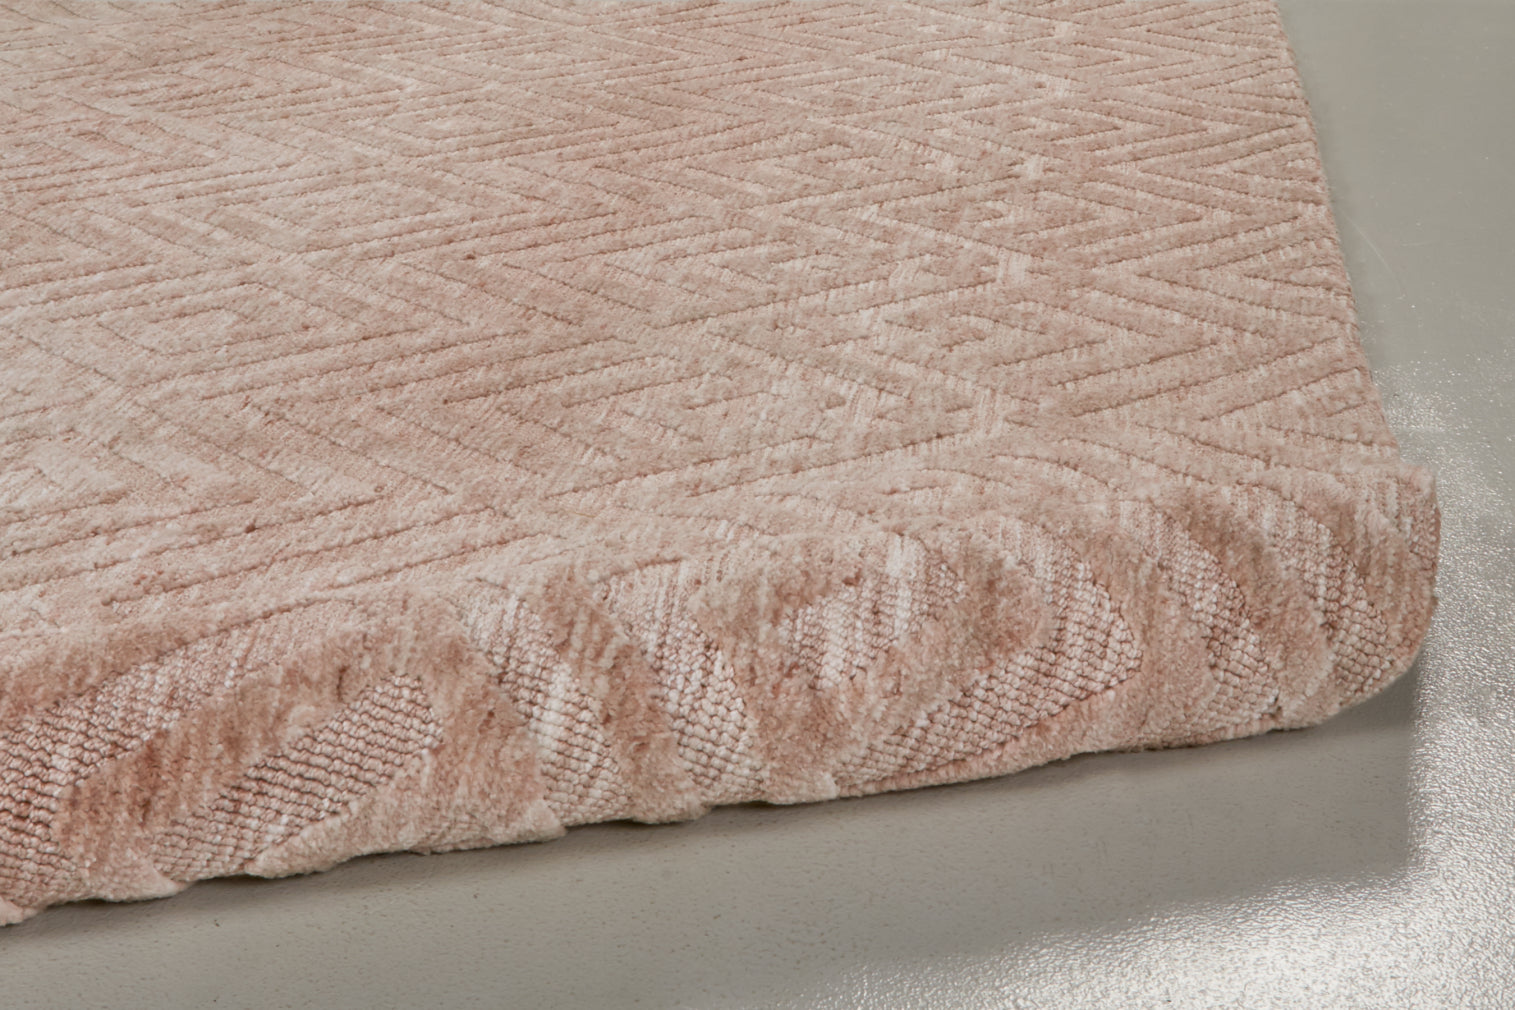 Feizy Colton 8792F Pink Area Rug